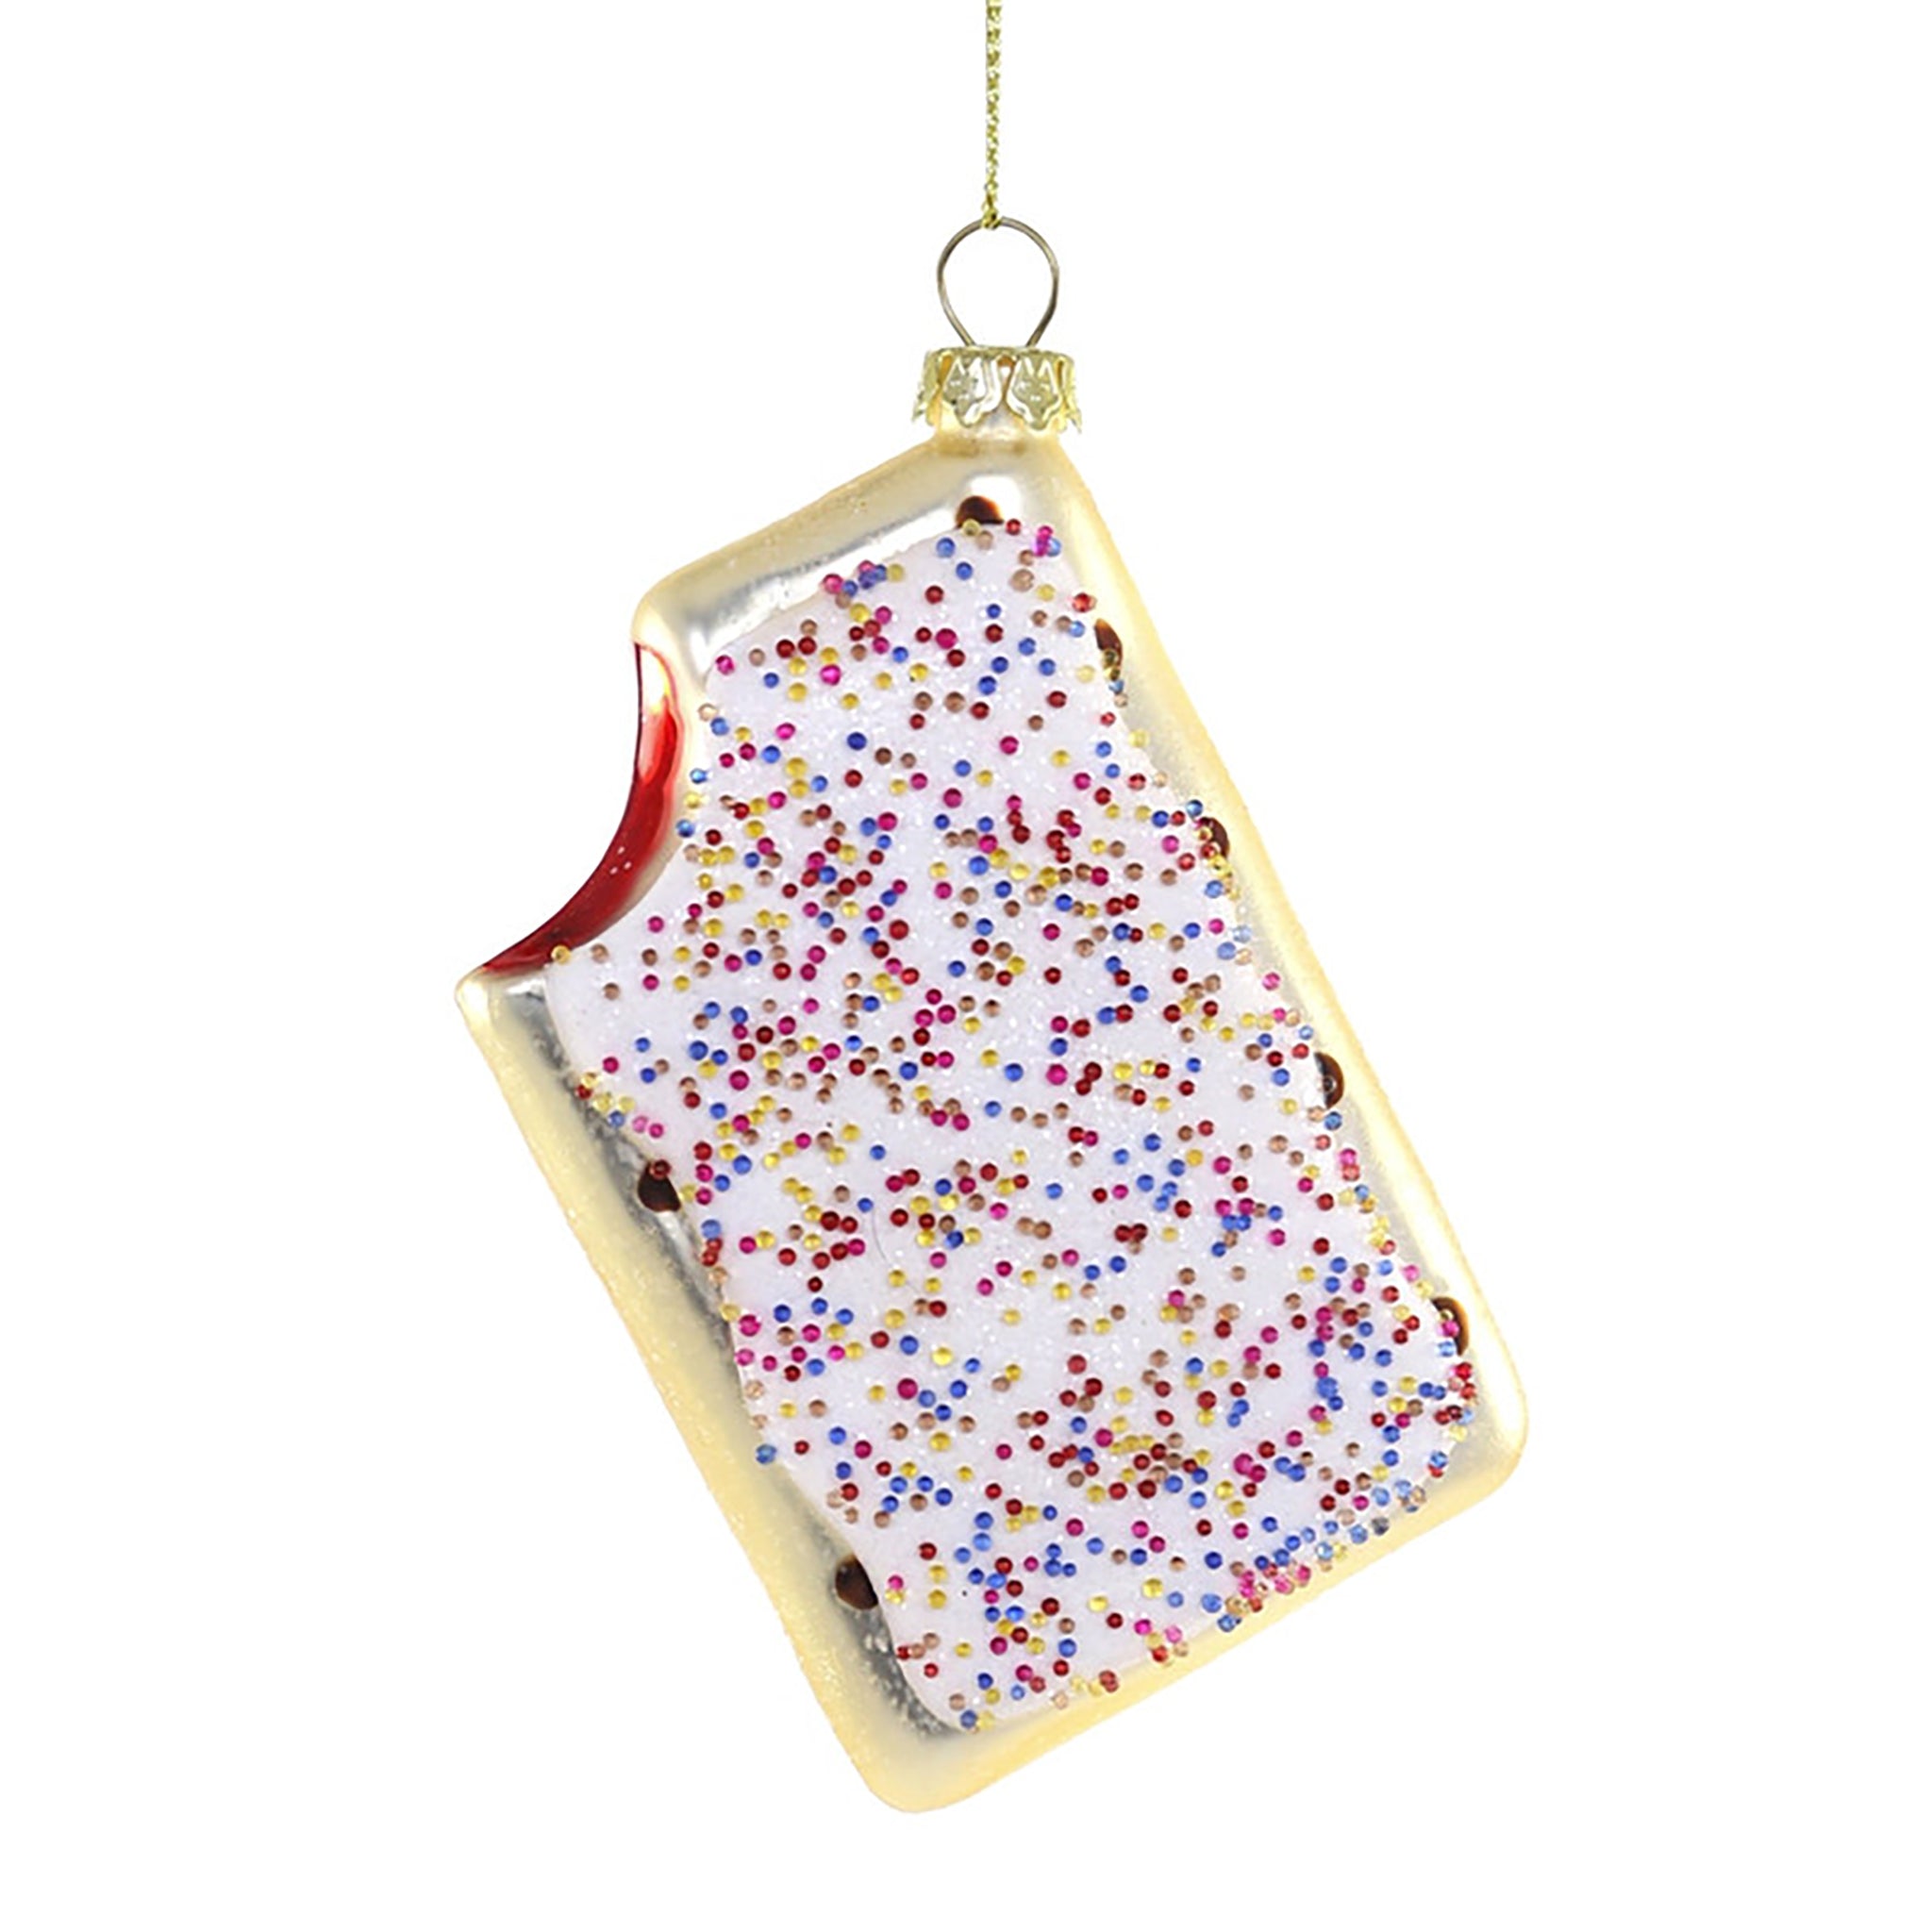 Toaster Pastry Ornament